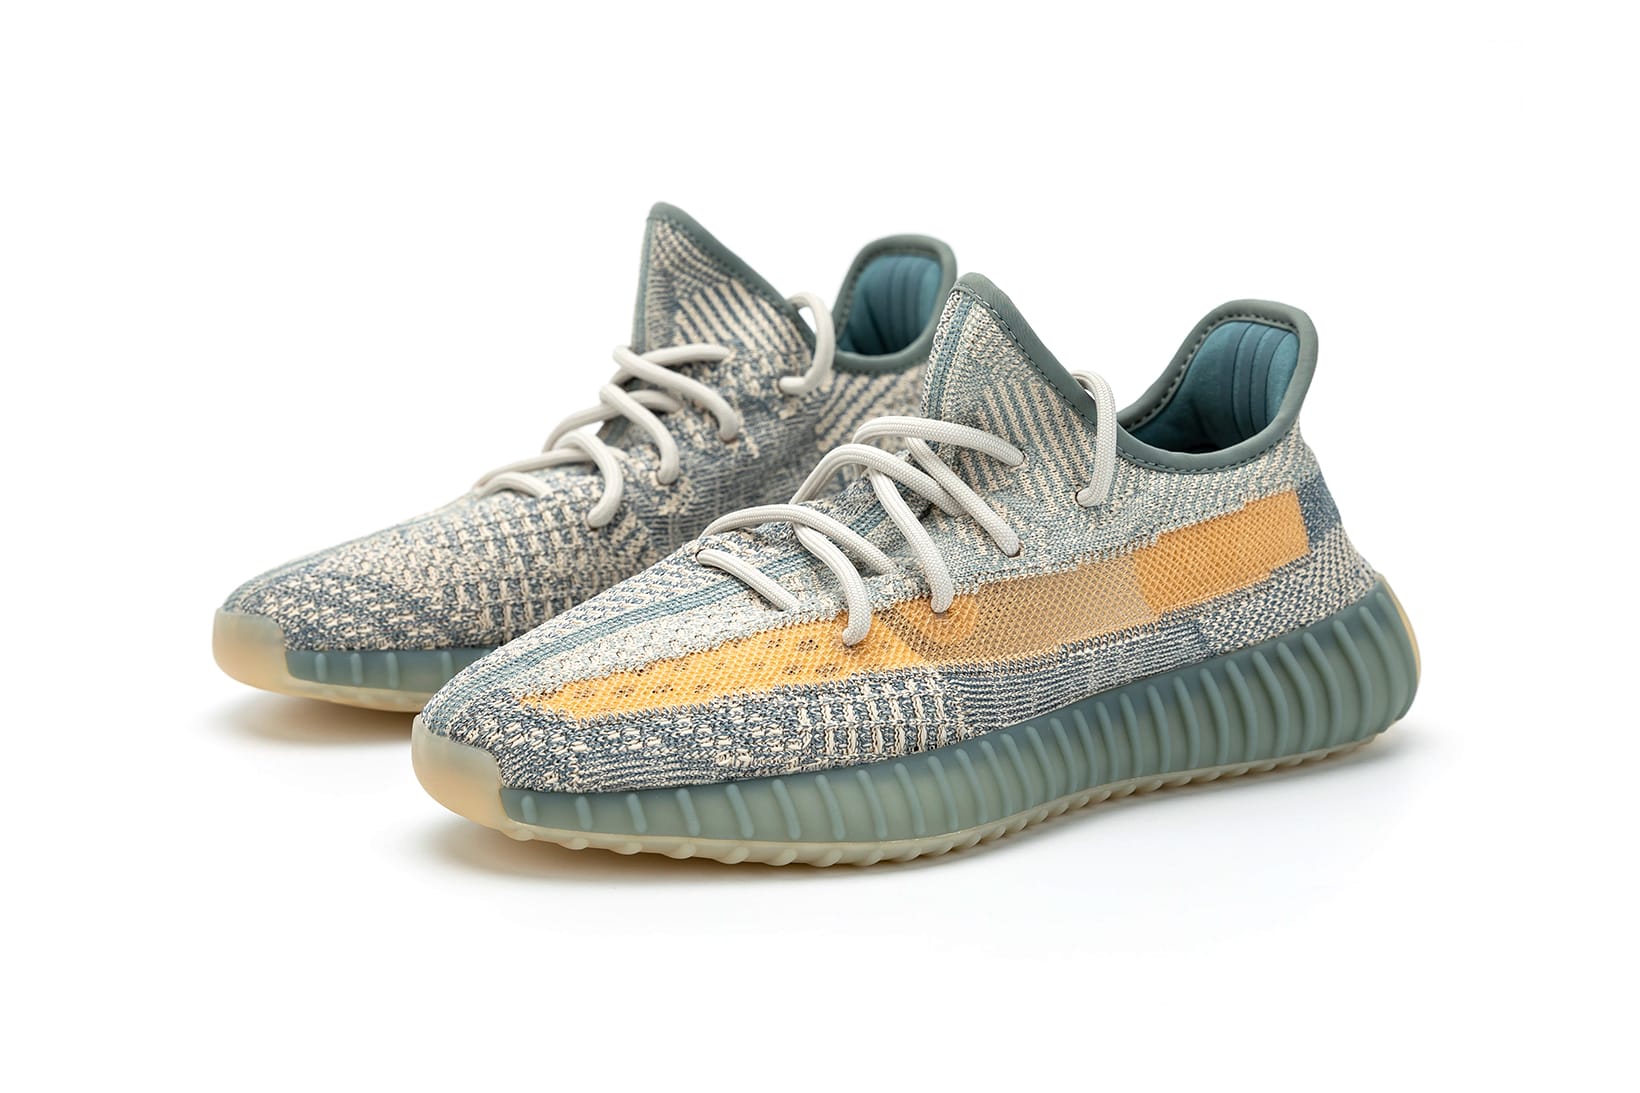 green and blue yeezys